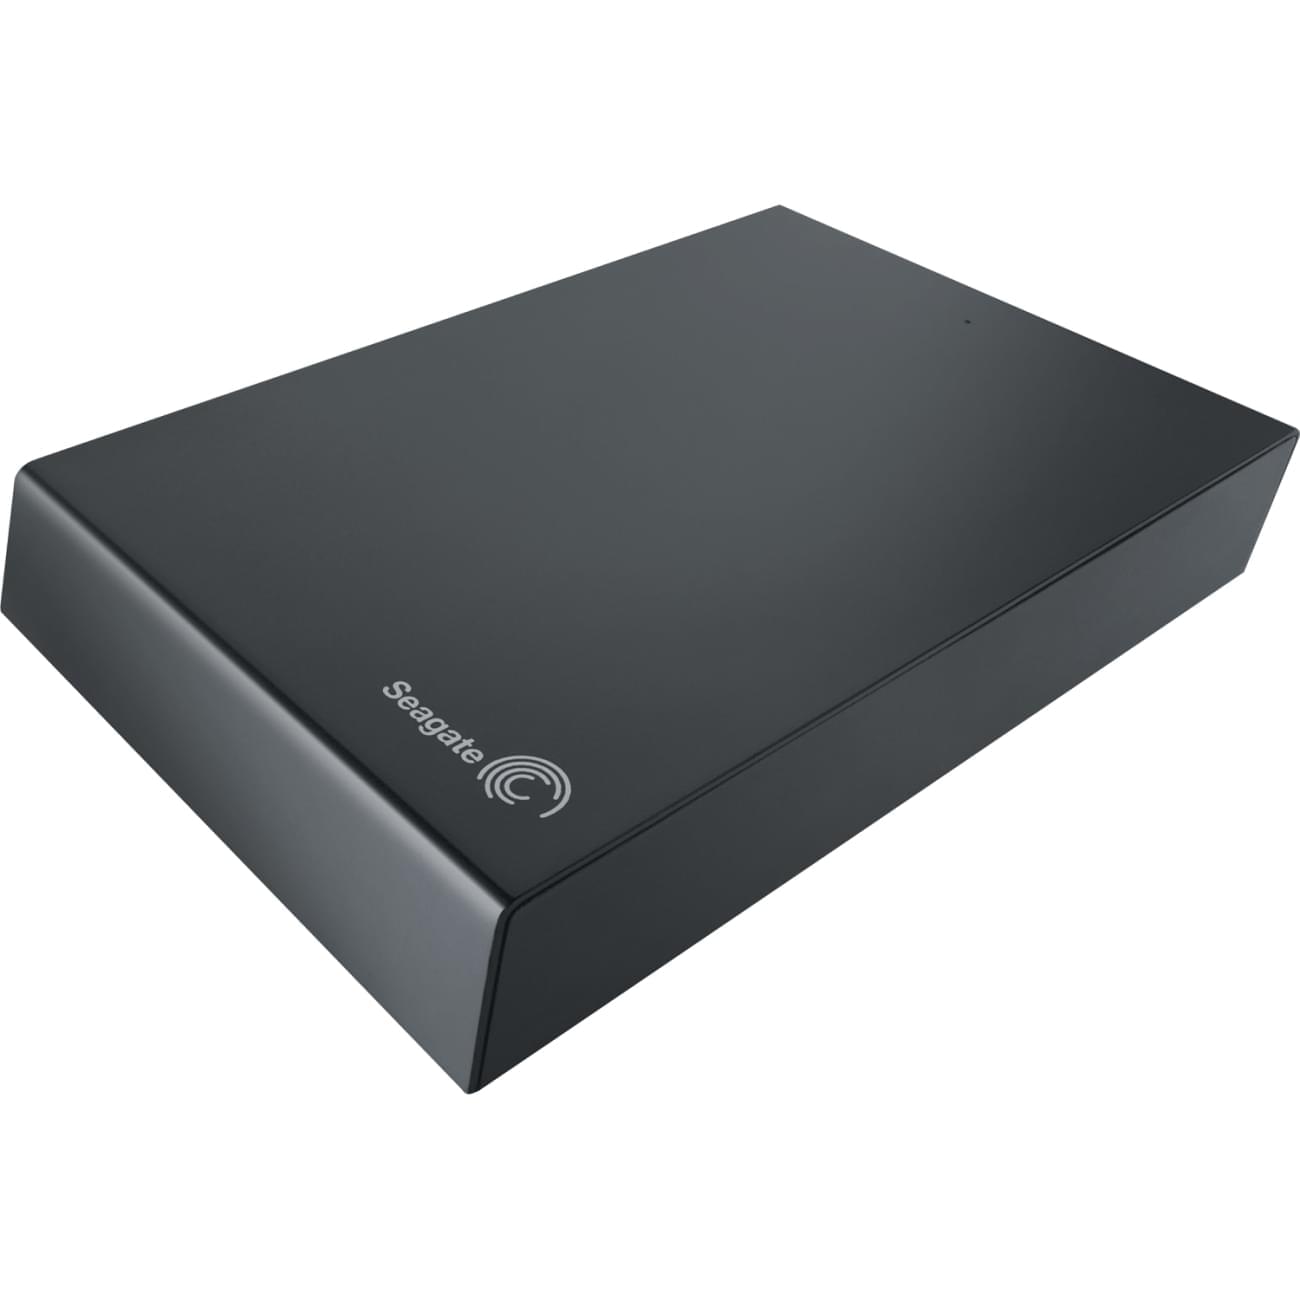 Disque dur externe Seagate 4To USB3.0 - STBV4000200